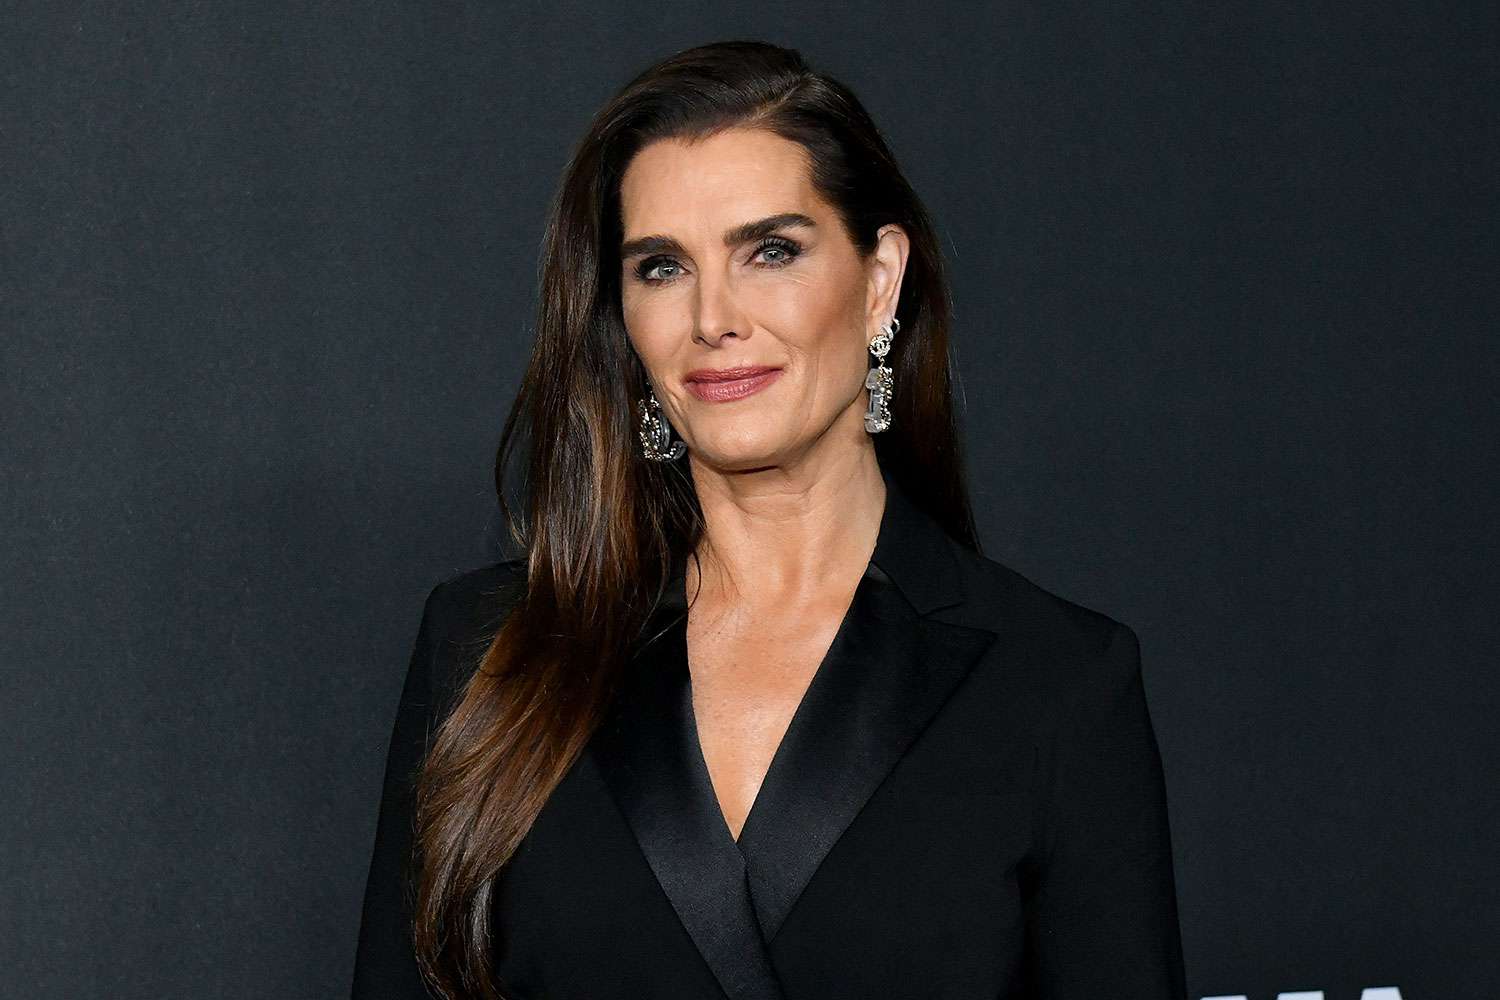 Brooke Shields discloses that she was raped in her twenties: I suddenly “absolutely froze”